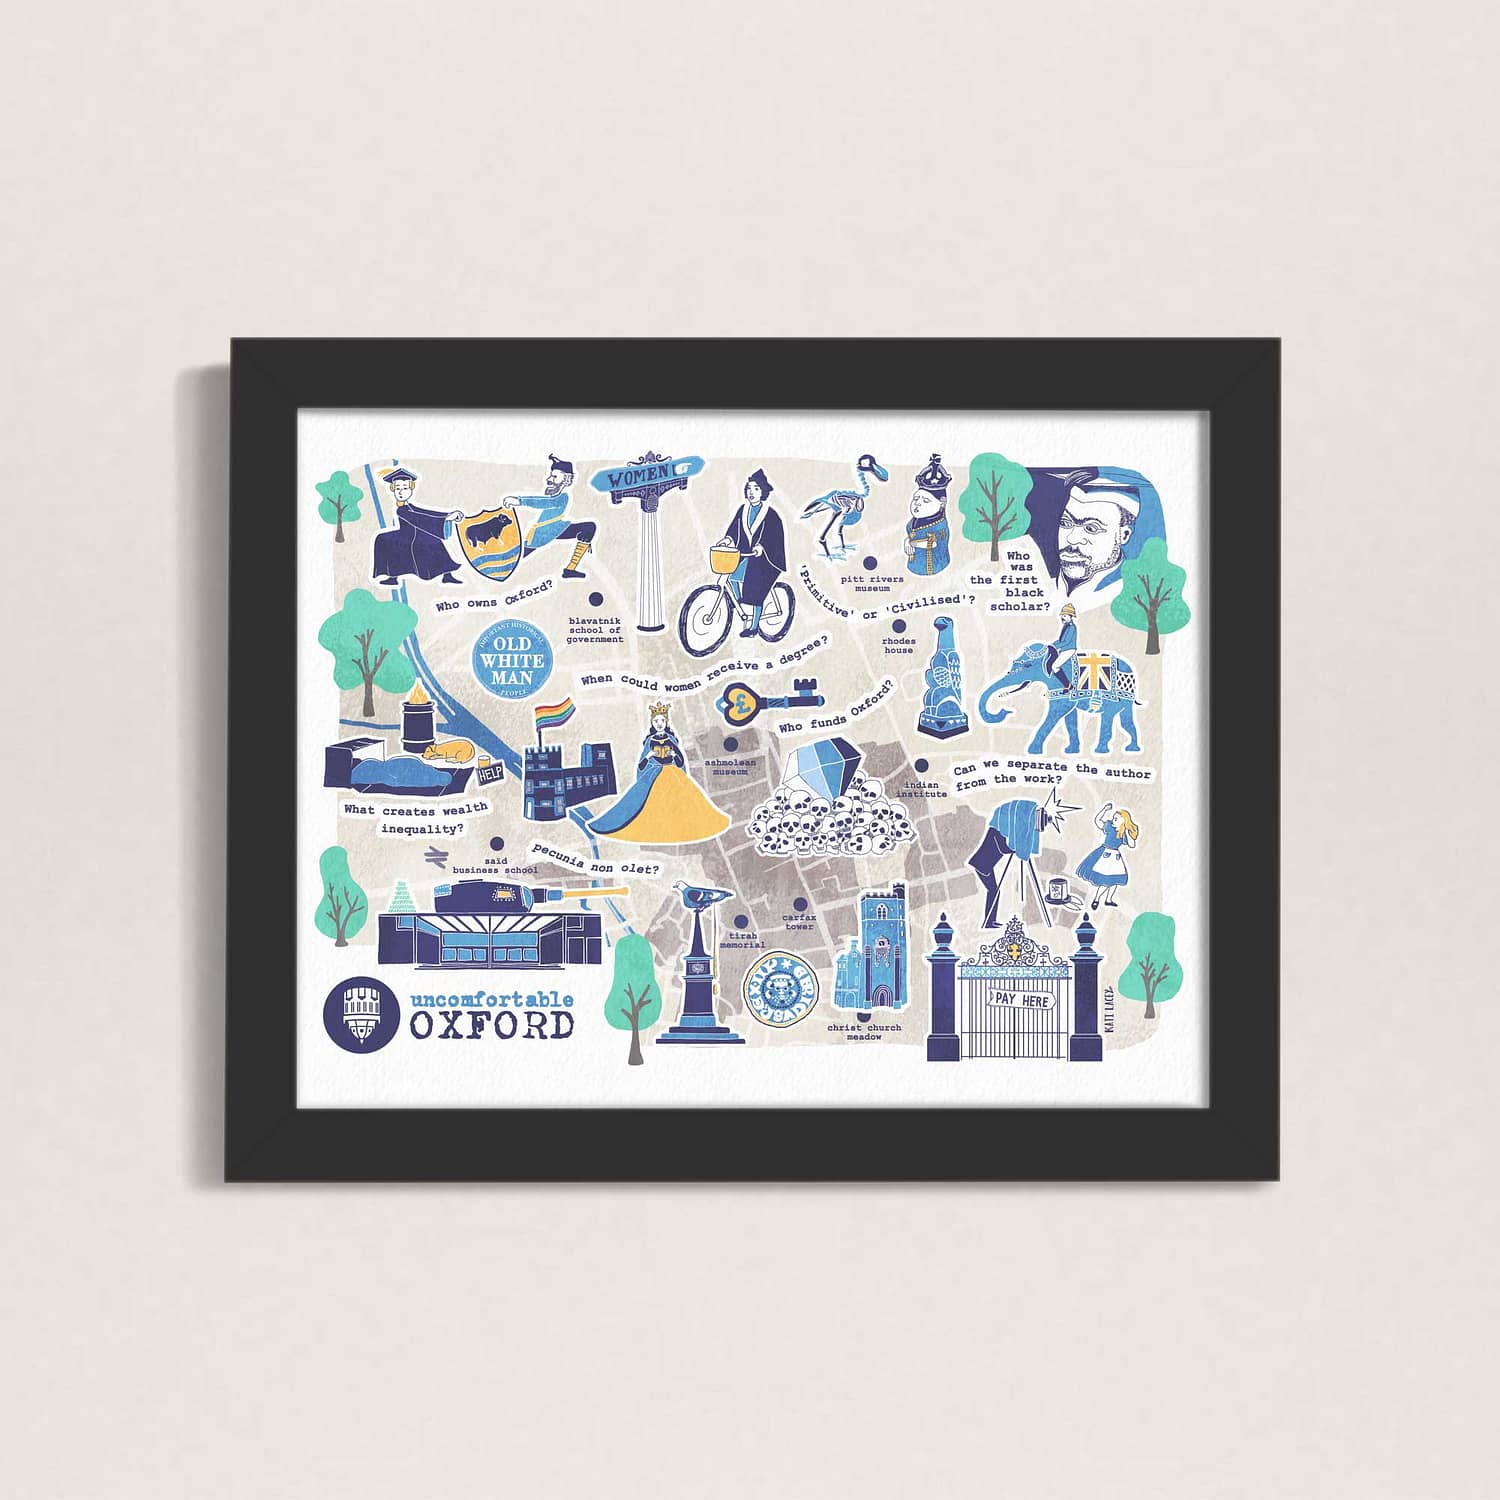 Illustrated-Oxford-Map-Uncomfortable-Oxford-design-by-Kati-Lacey